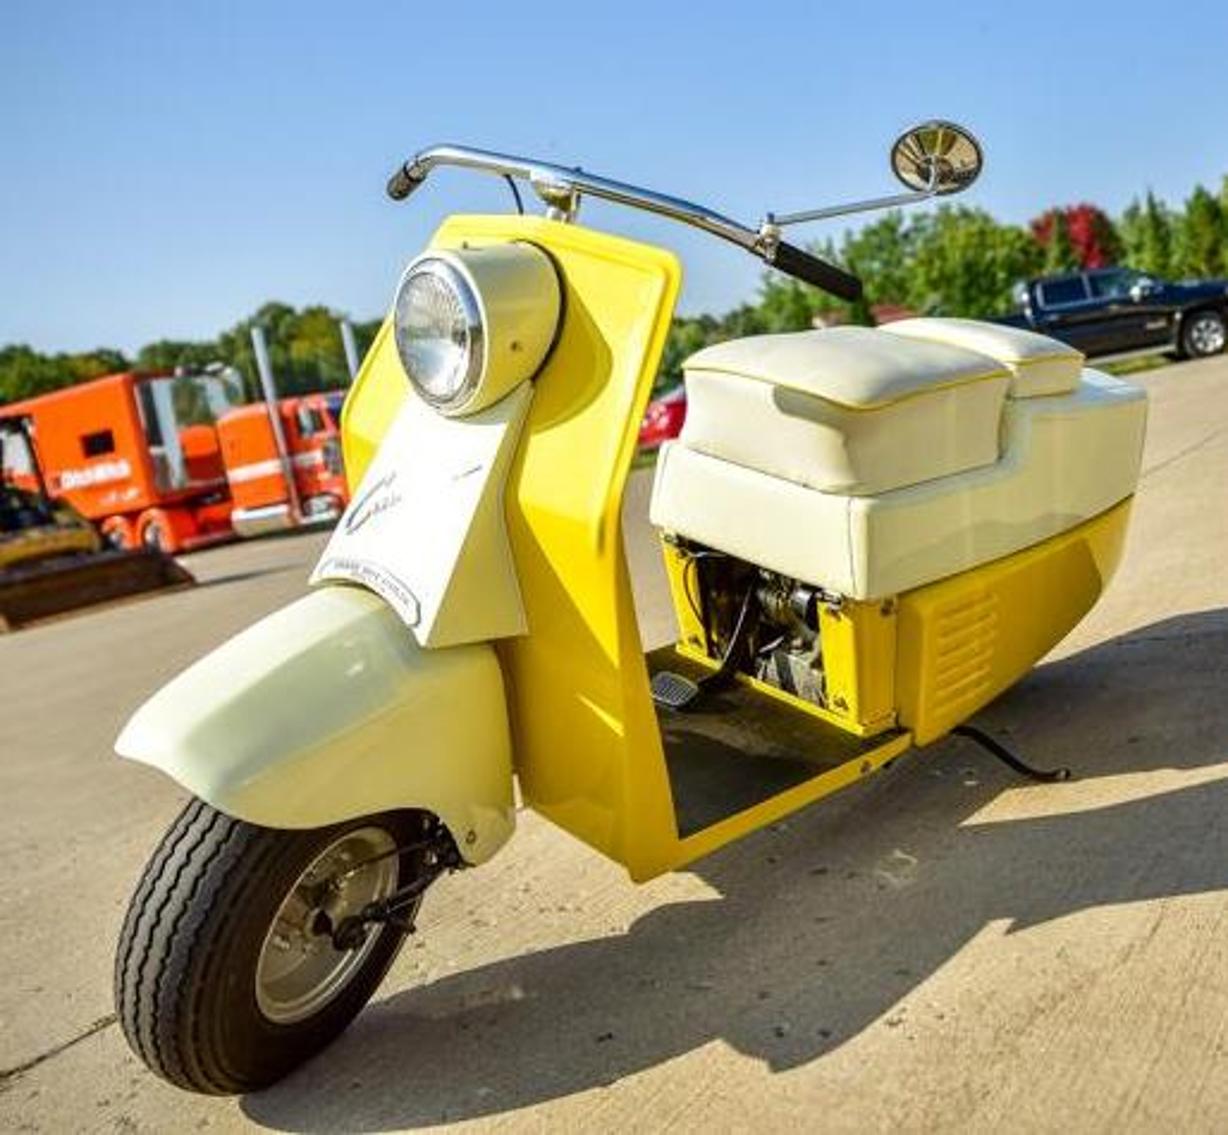 1959 Cushman Scooter and 1972 Honda Trail CT70